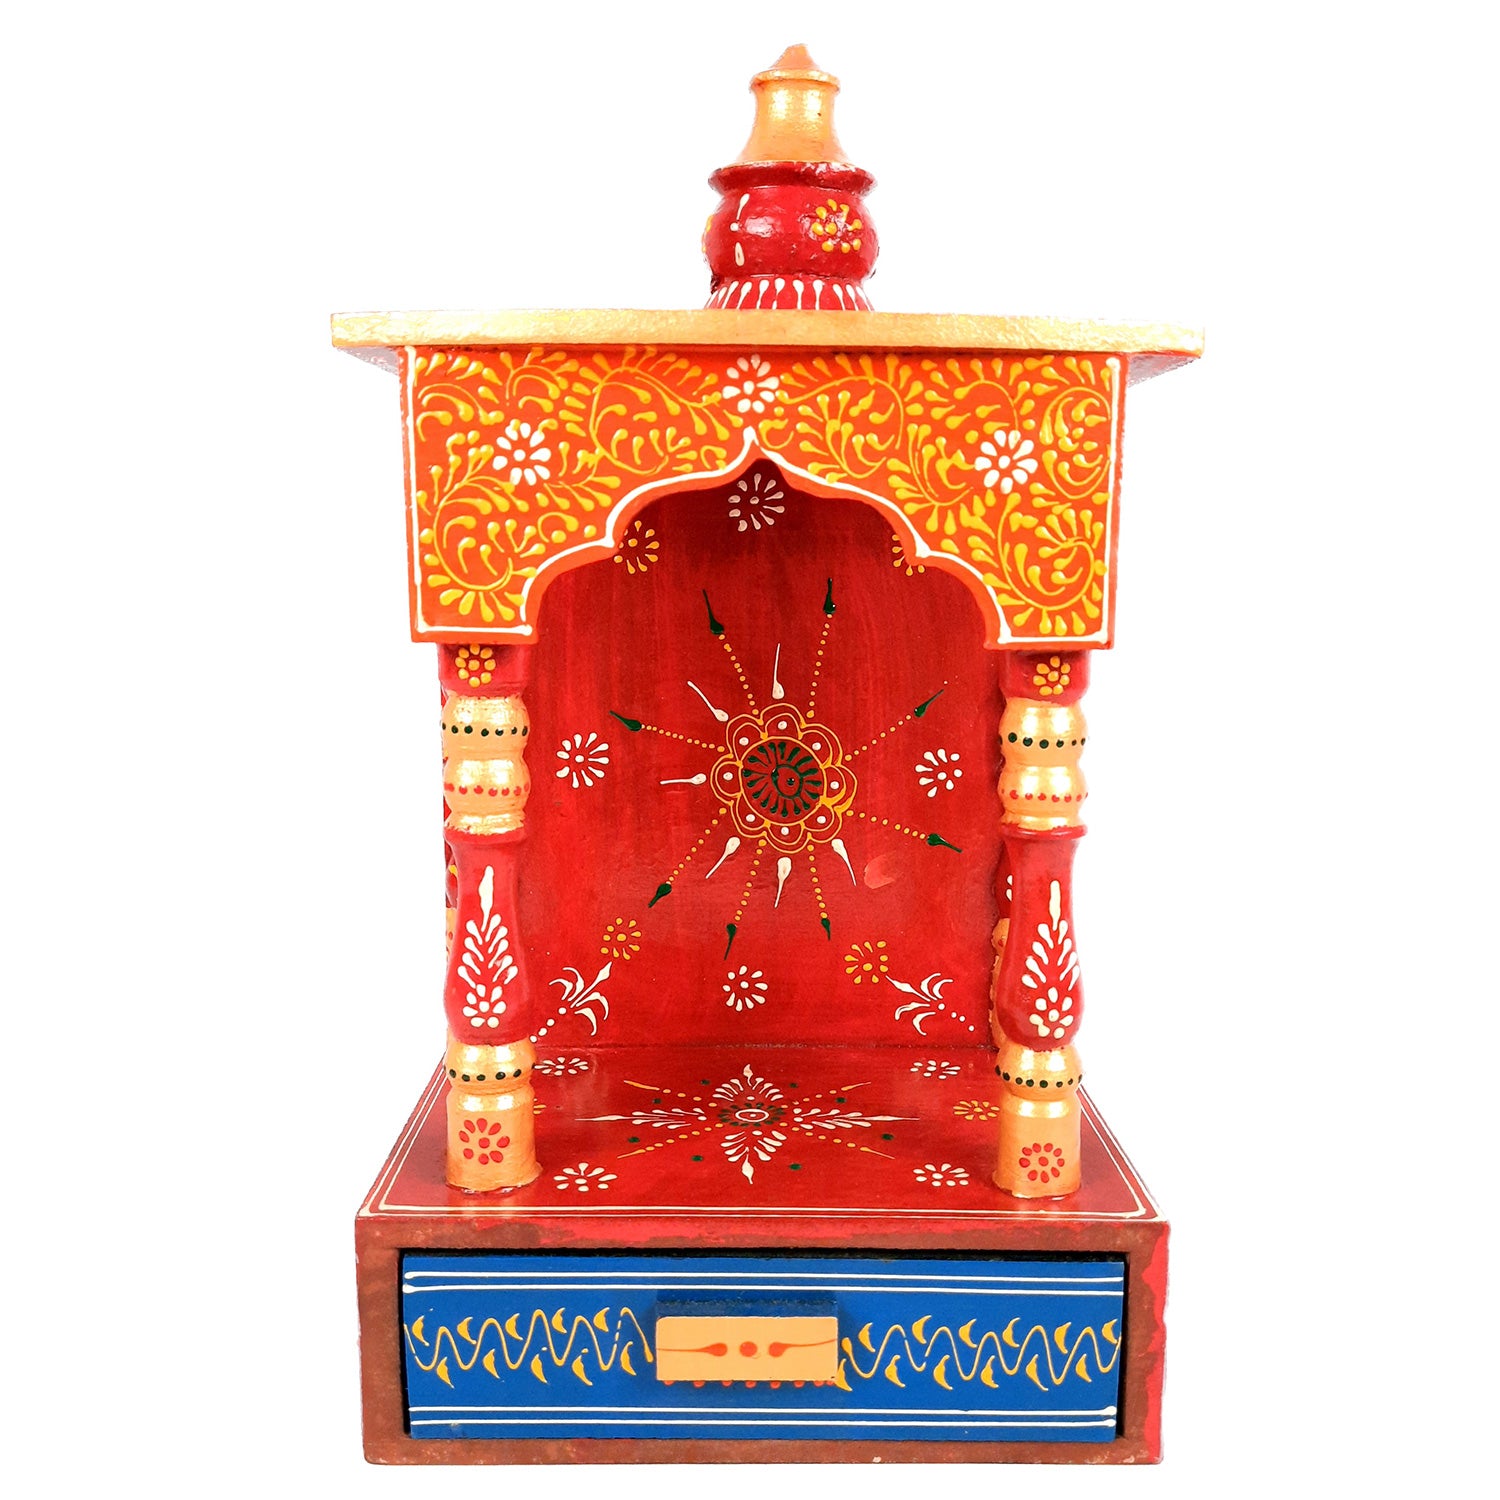 Pooja Temple Wooden | God Temple For Home With In Built Drawer | Puja Mandir With Storage | Pooja Unit Wall Mounted - For Ghar, Office, House, Shop 13 inch -Apkamart